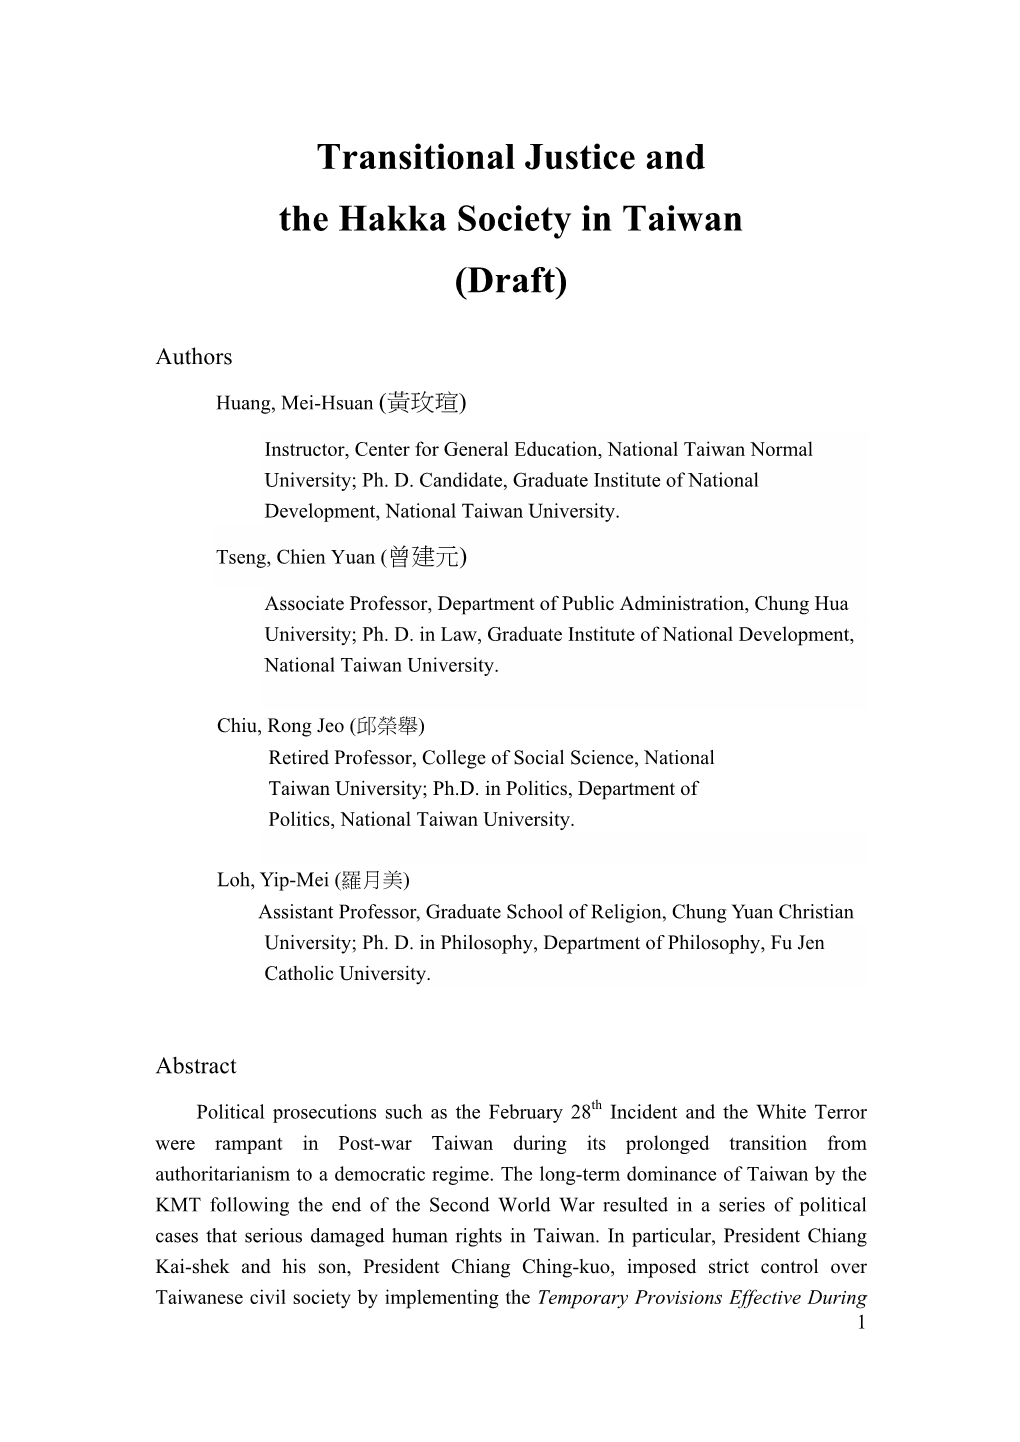 Transitional Justice and the Hakka Society in Taiwan (Draft)